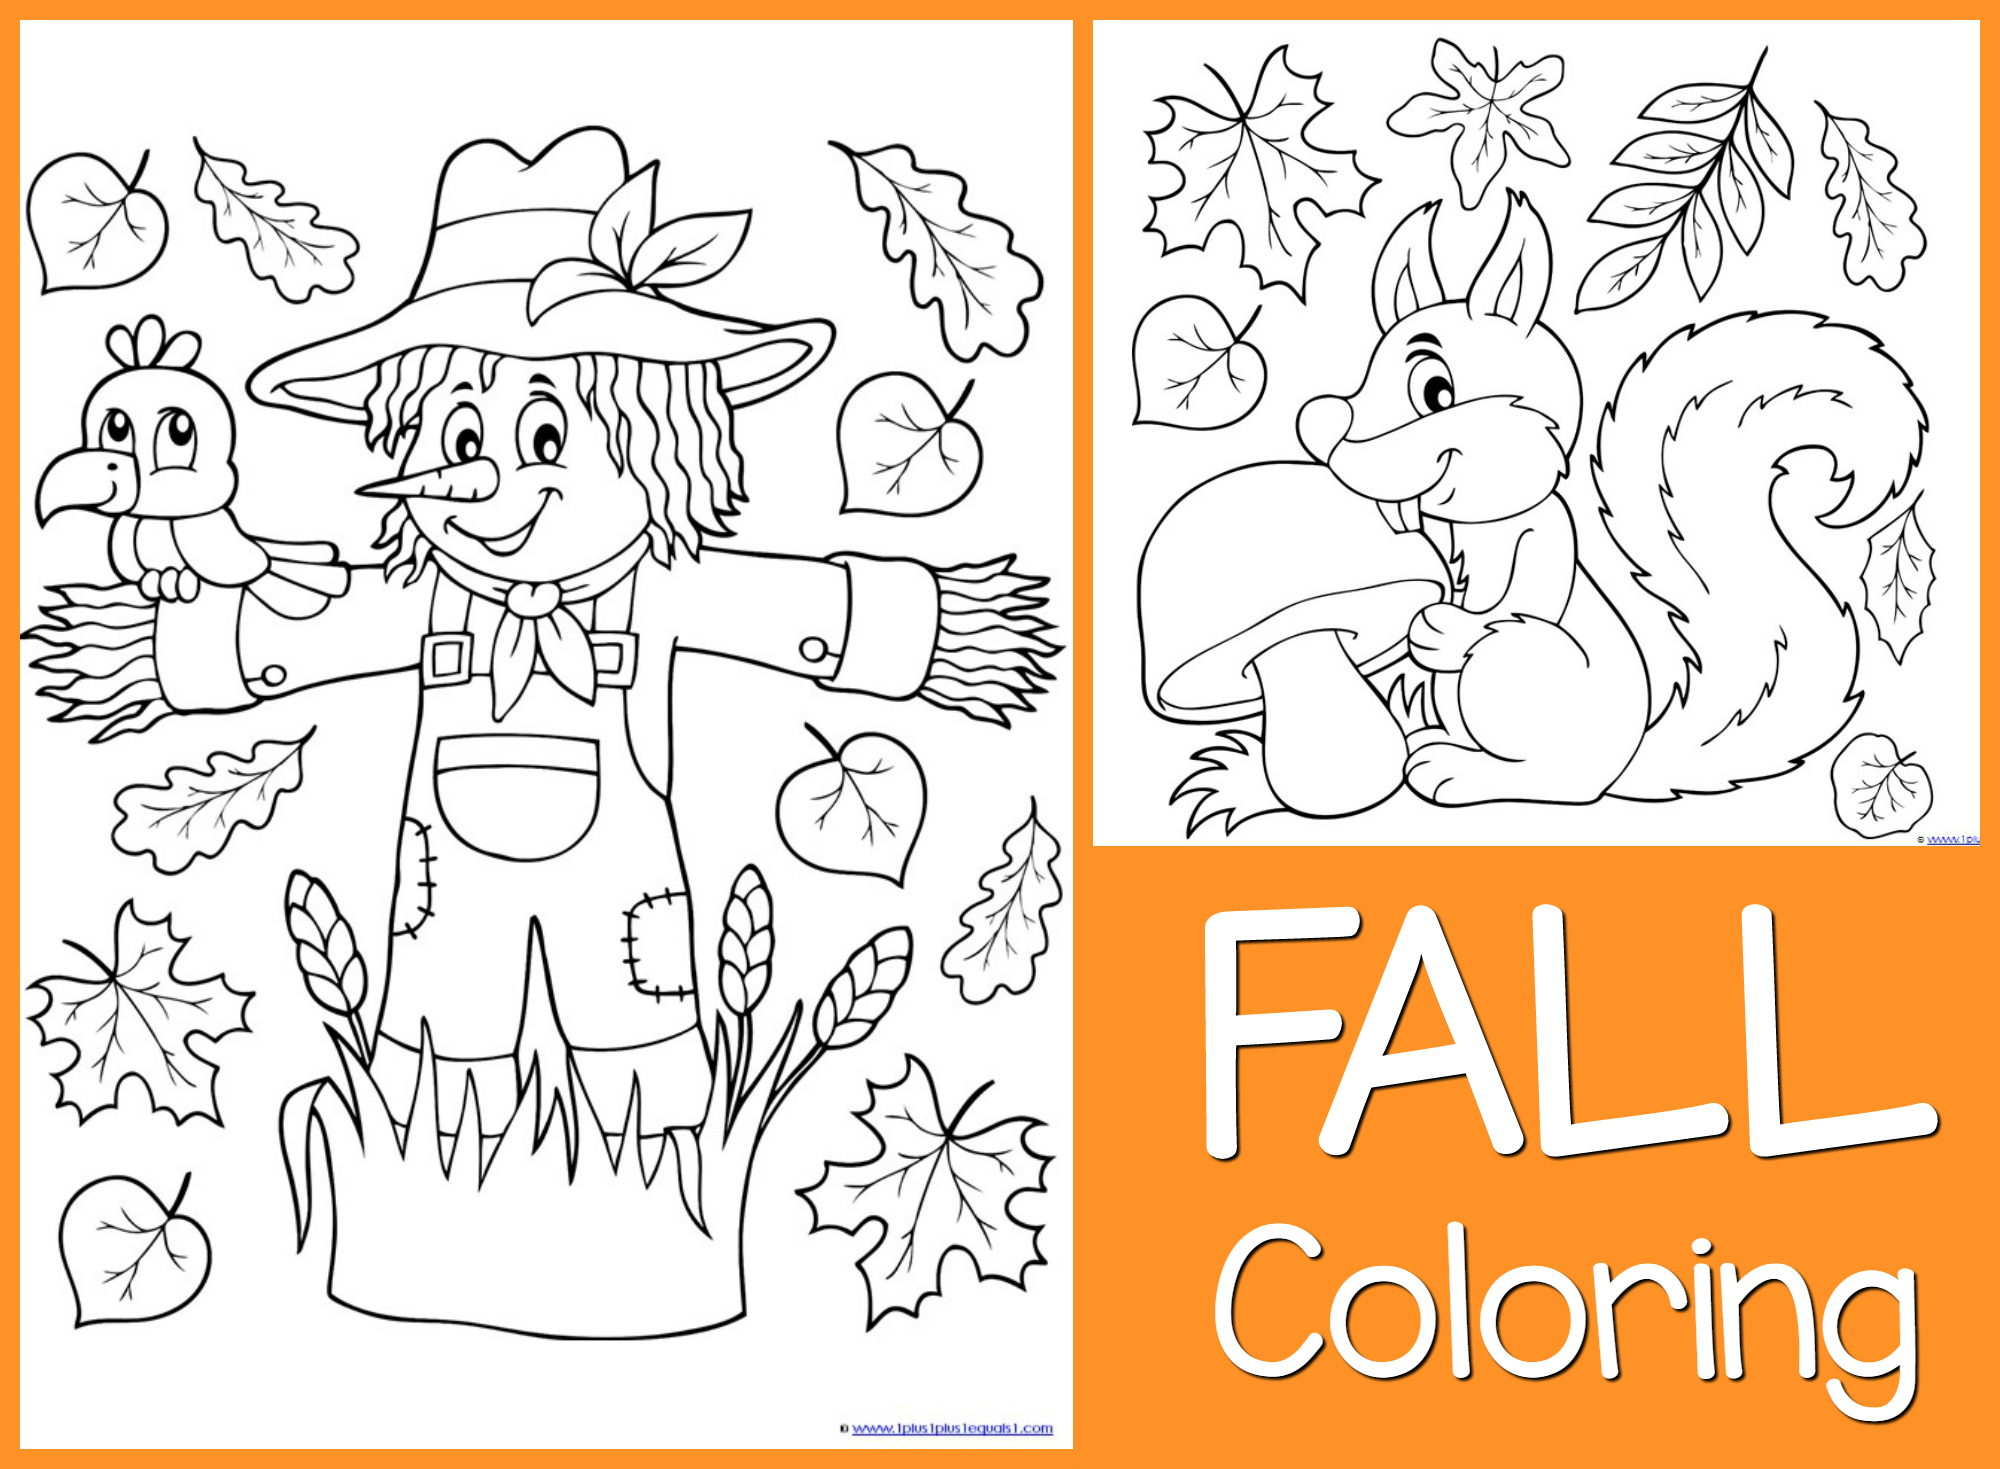 Coloring Pages : Coloring Pages Free Printable Fall Fabulous - Free Fall Printable Coloring Sheets